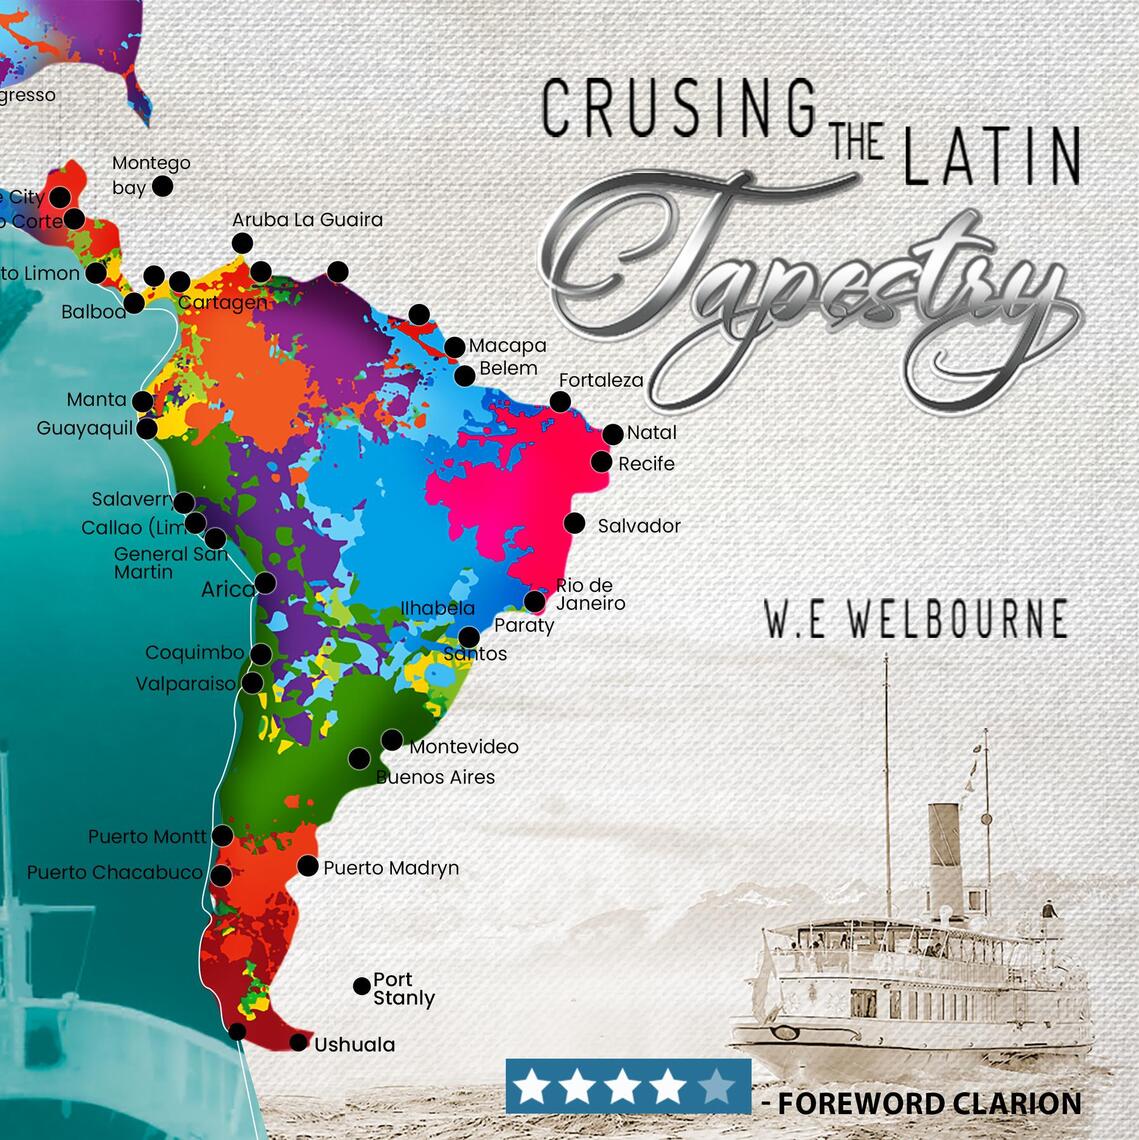 Cruising the Latin Tapestry by photo